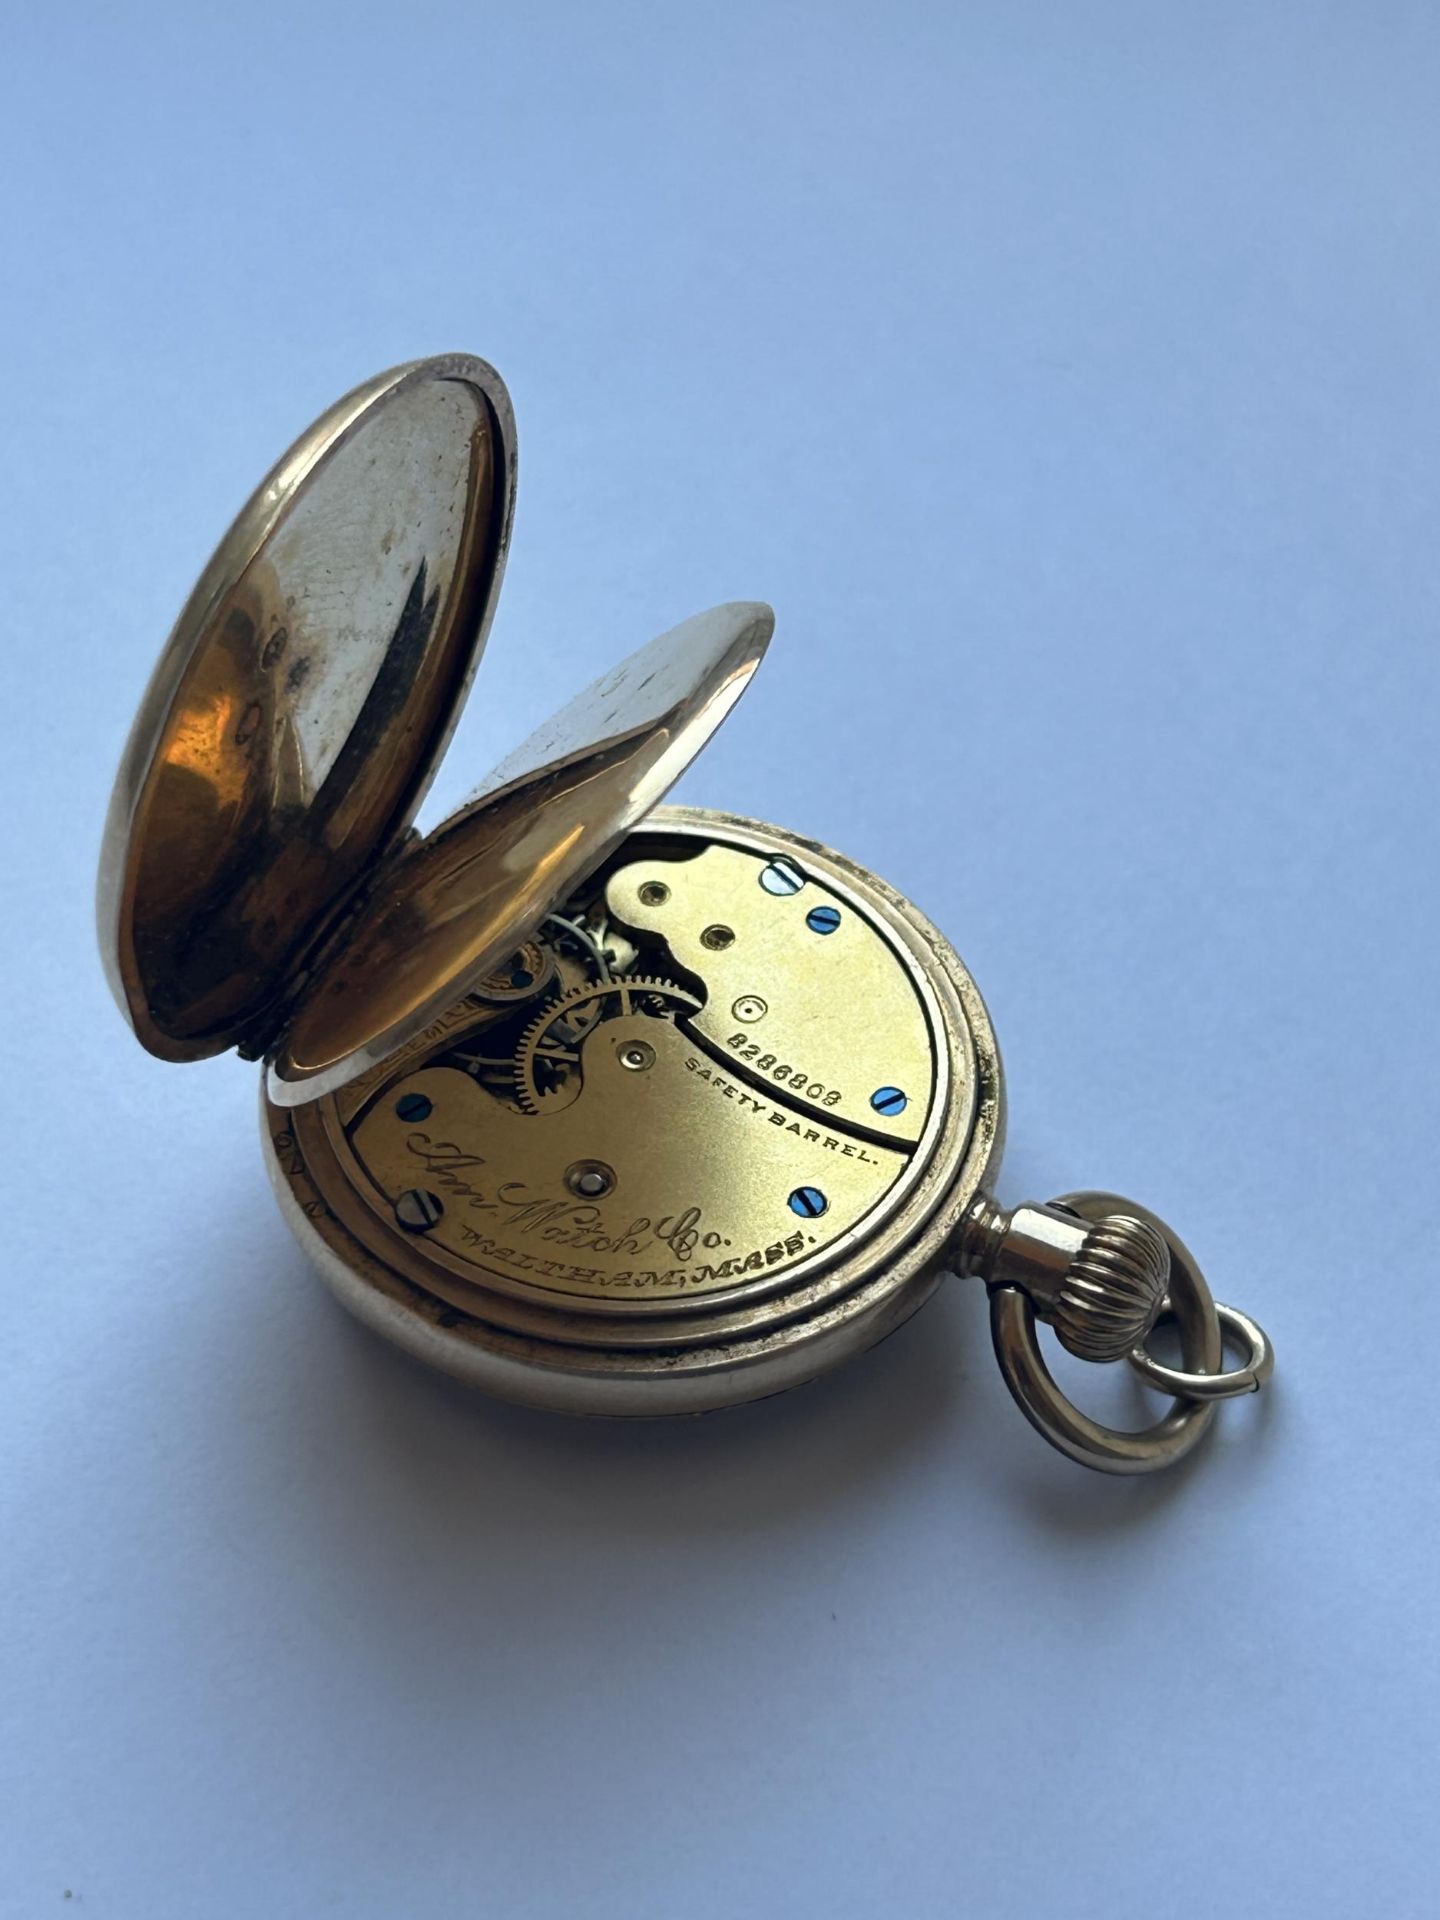 A 14CT GOLD LADIES OPEN FACED POCKET WATCH GROSS WEIGHT 40.20 GRAMS - Image 6 of 6